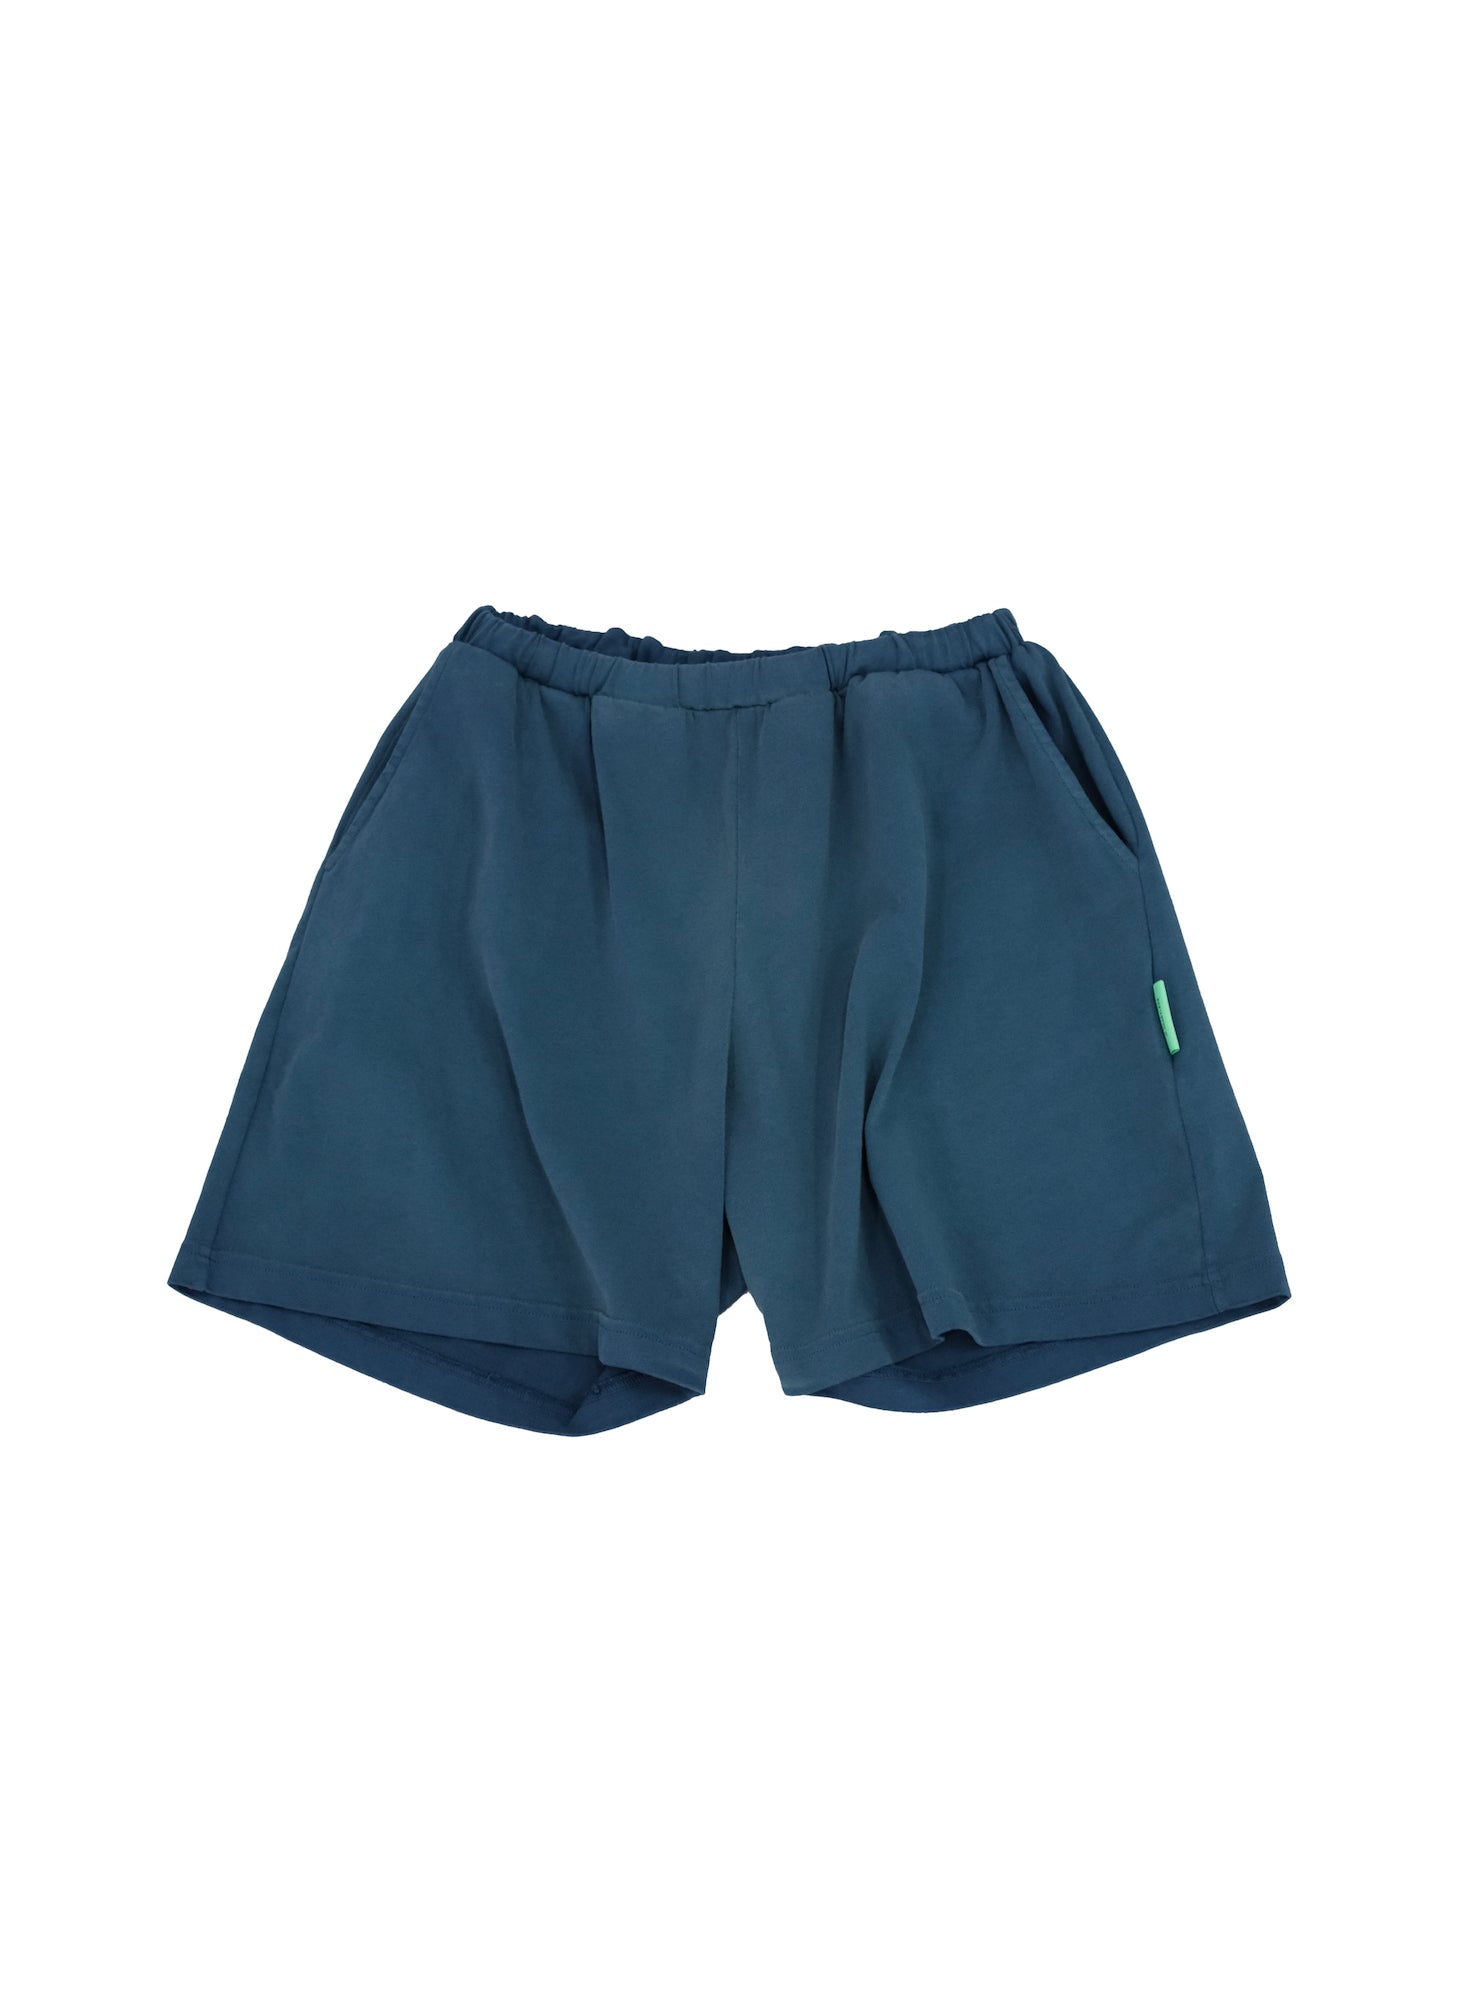 WILLY CHAVARRIA / GYM SHORT